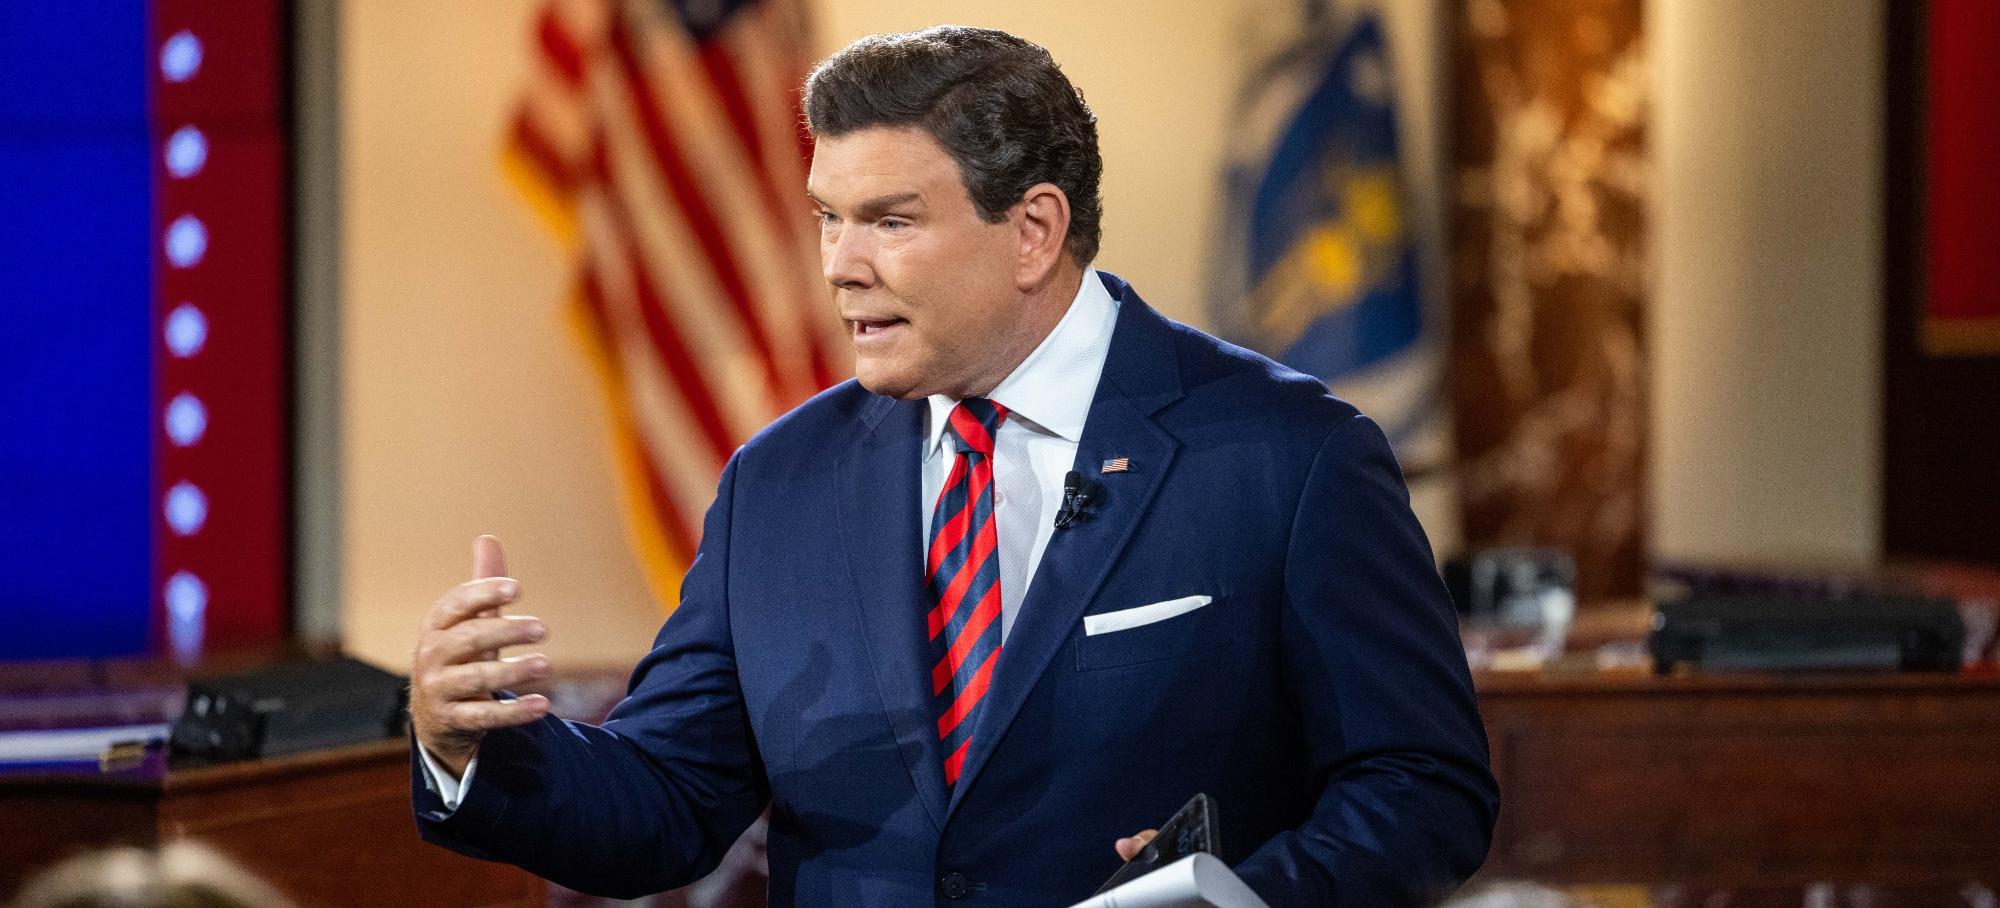 Bret Baier speaking to attendees at the Edward M. Kennedy Institute for the United States Senate